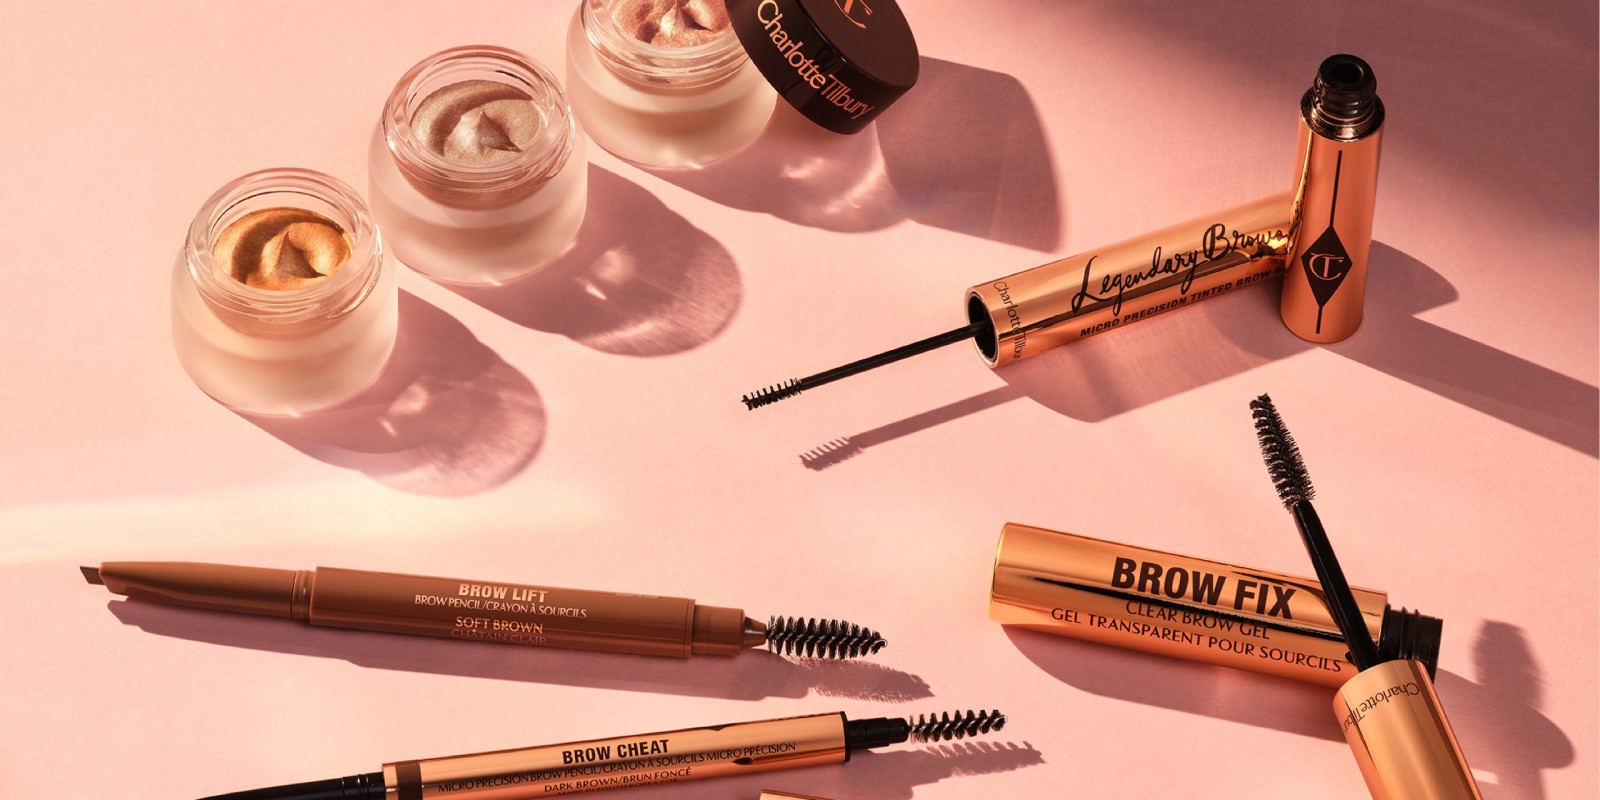 Trio of cream eyeshadows in shimmery shades of gold and pink in open pots with dark brown lids, eyebrow tints, eyebrow gels and brushes, mascara, and makeup remover in a large, clear bottle with a white-coloured cap.